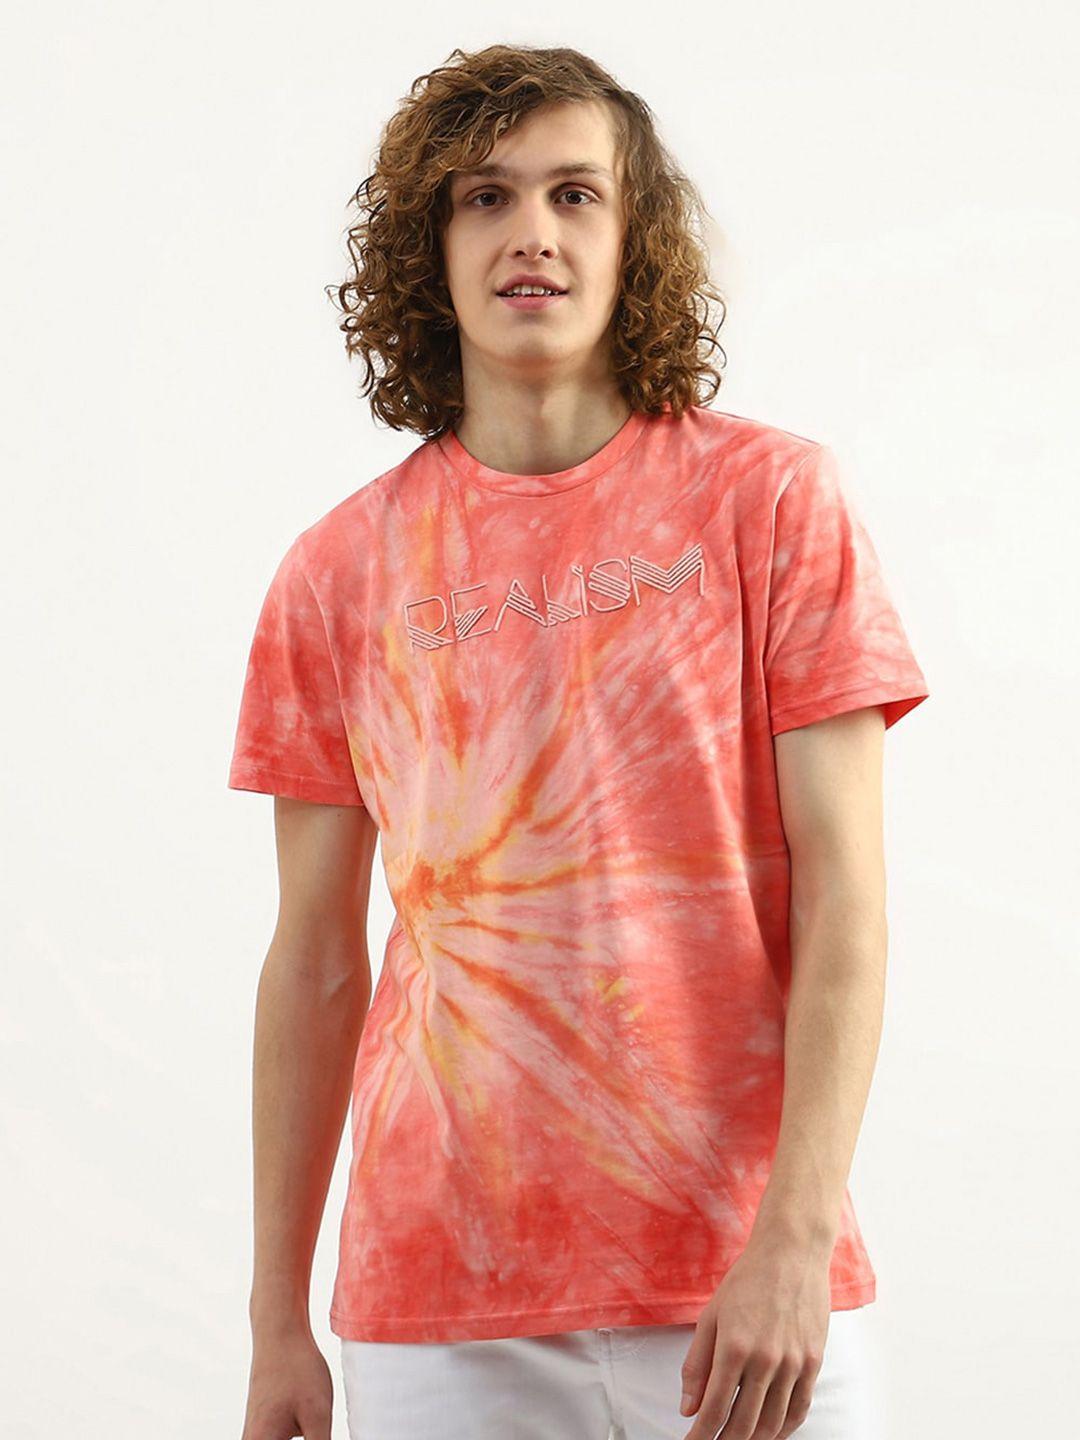 united-colors-of-benetton-men-printed-loose-fit-cotton-t-shirt